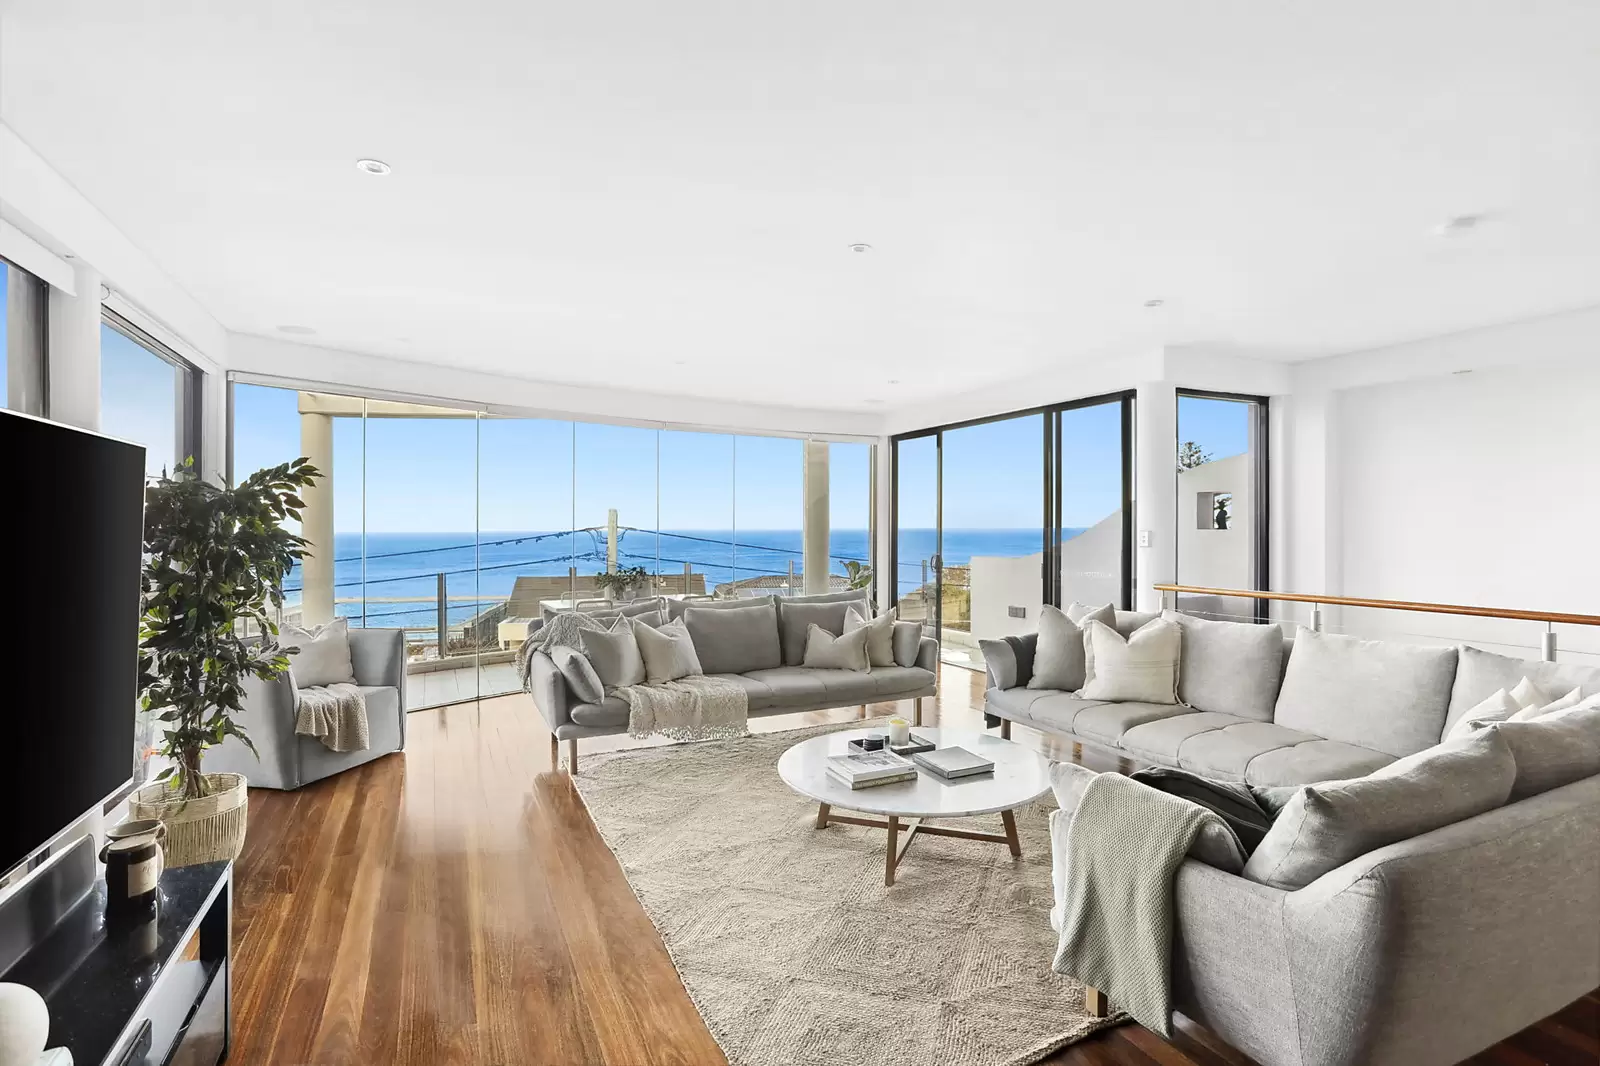 Photo #10: 68 Denning Street, South Coogee - Auction by Sydney Sotheby's International Realty